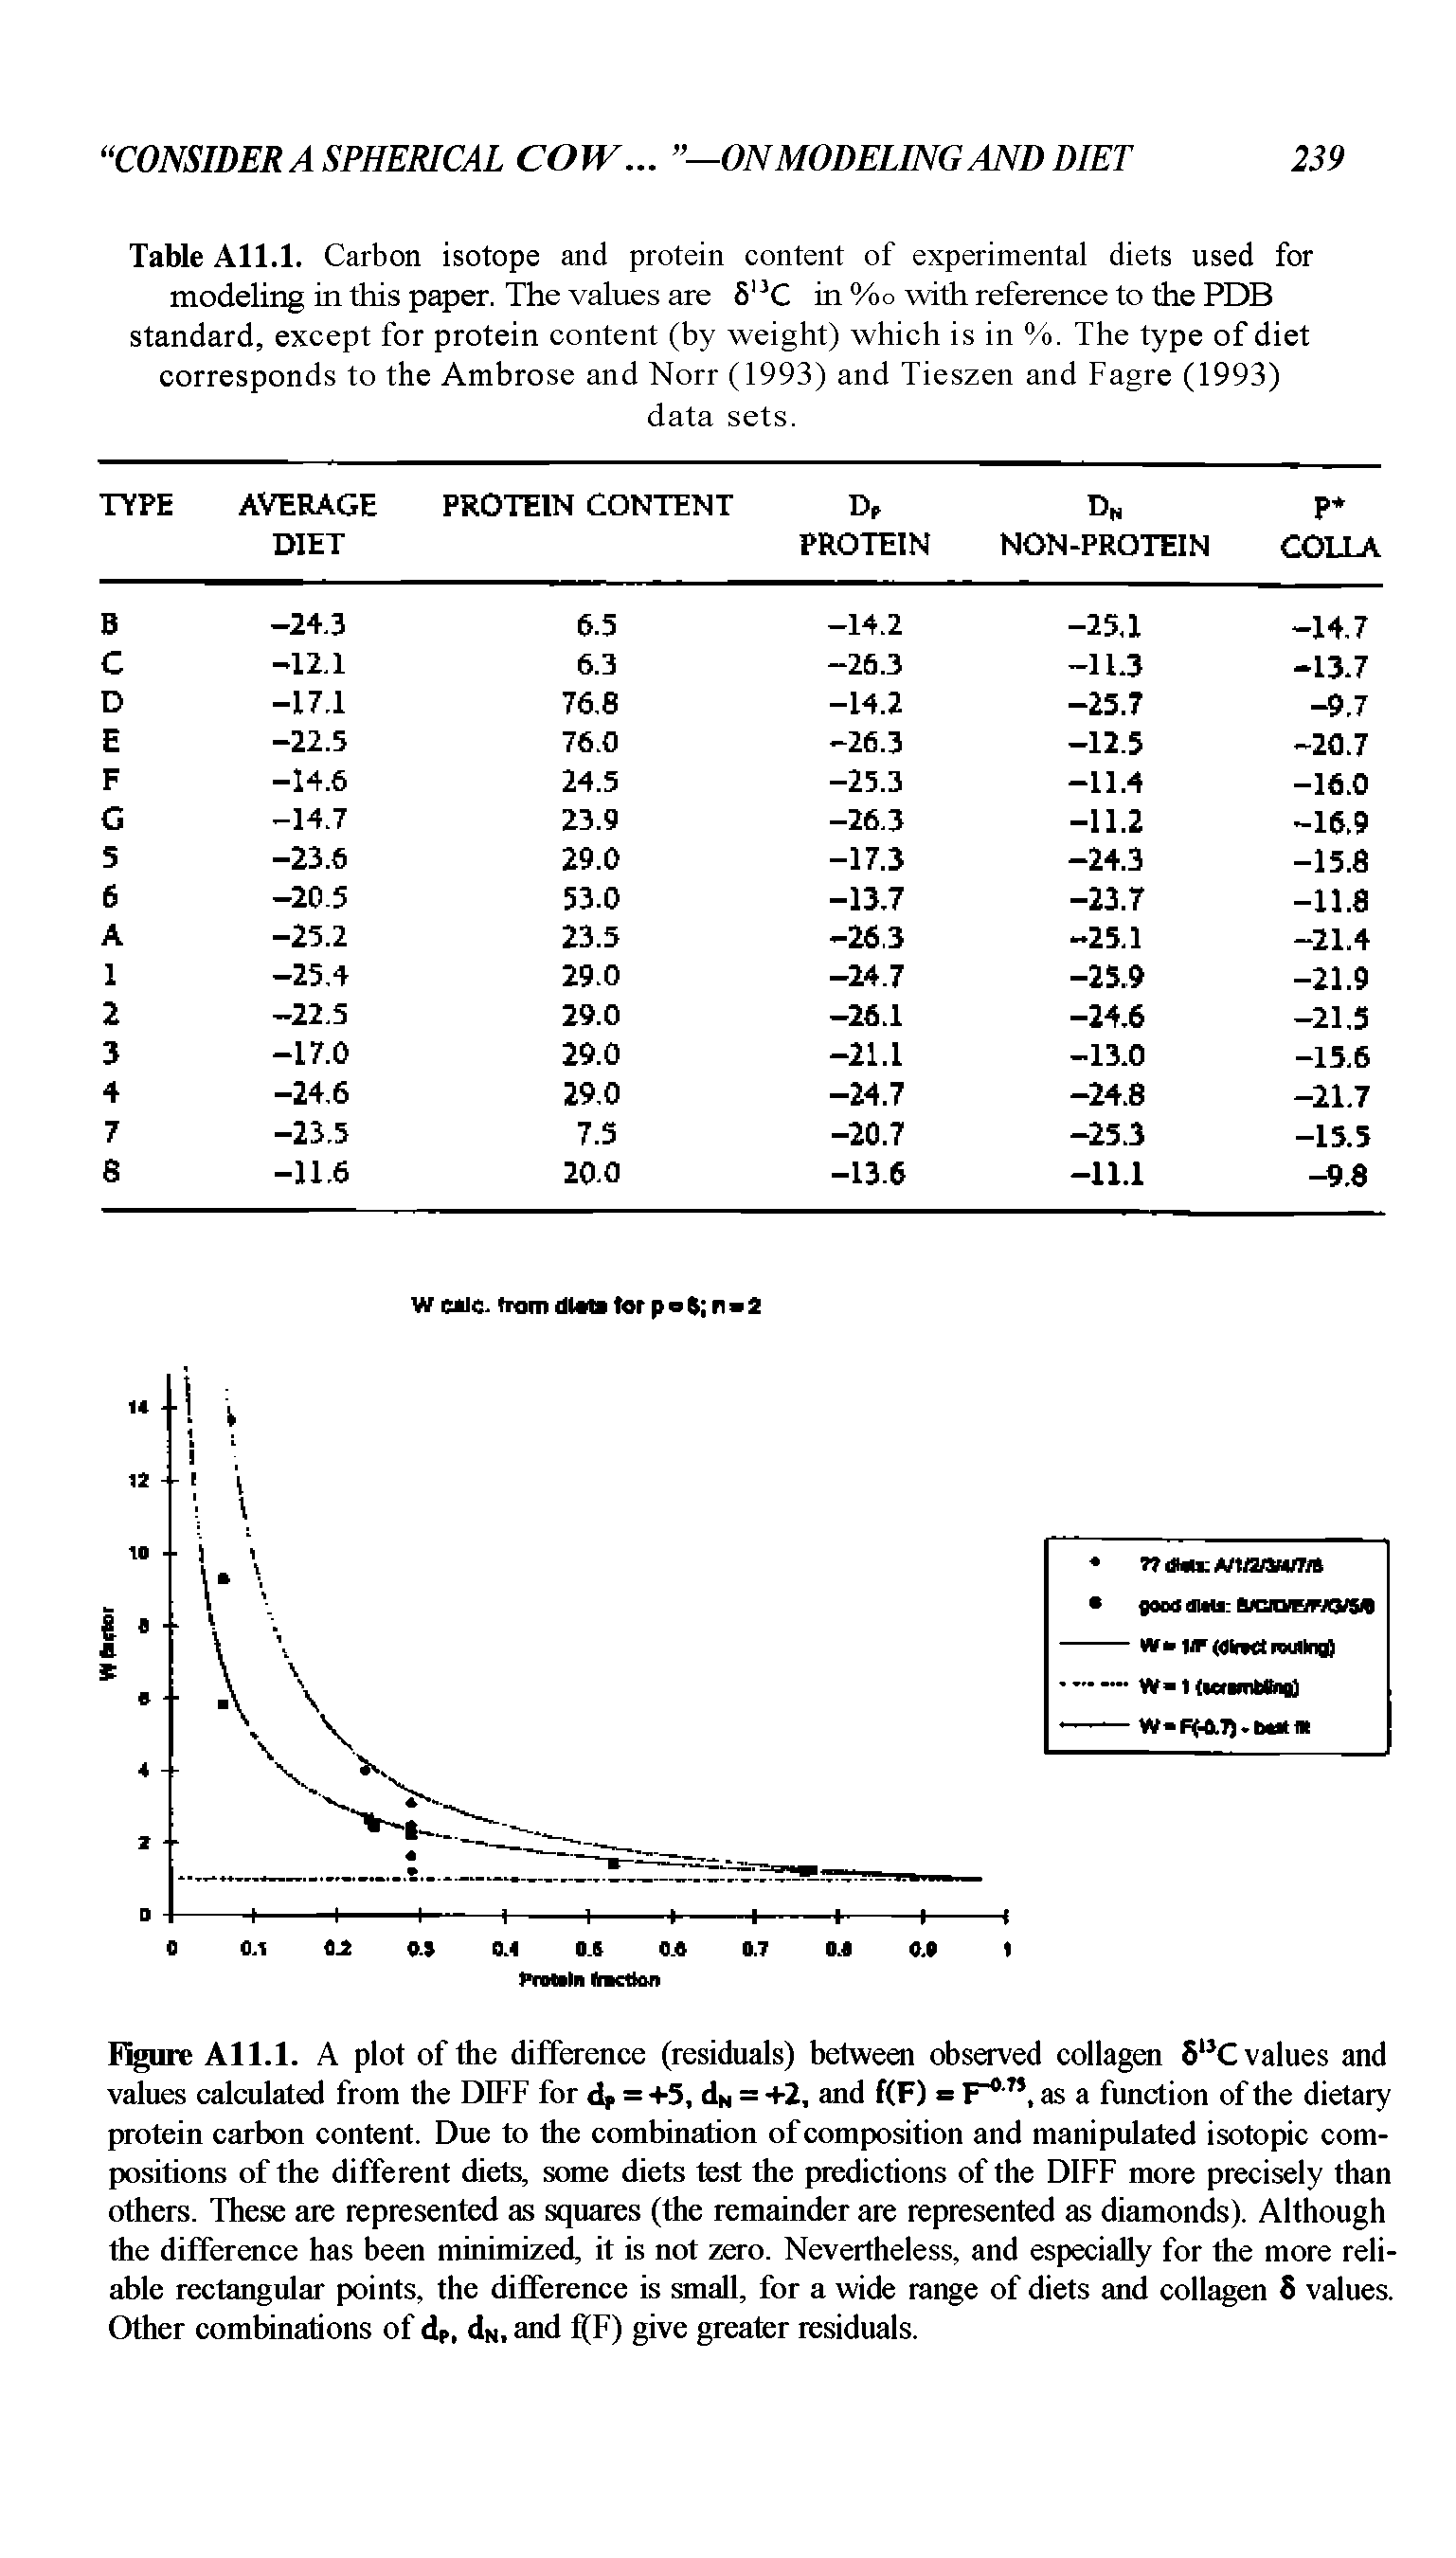 Figure All.l. A plot of the difference (residuals) between observed collagen 5 C values and values calculated from the DIFF for dp = +5, dn = +2, and f(F) = F , as a function of the dietary protein carbon content. Due to the eombination of eomposition and manipulated isotopic compositions of the different diets, some diets test the predictions of the DIFF more precisely than others. These are represented as squares (the remainder are represented as diamonds). Although the differenee has been minimized, it is not zero. Nevertheless, and especially for the more reliable reetangular points, the differenee is small, for a wide range of diets and collagen 8 values. Other combinations of dp, ds. and 1(F) give greater residuals.